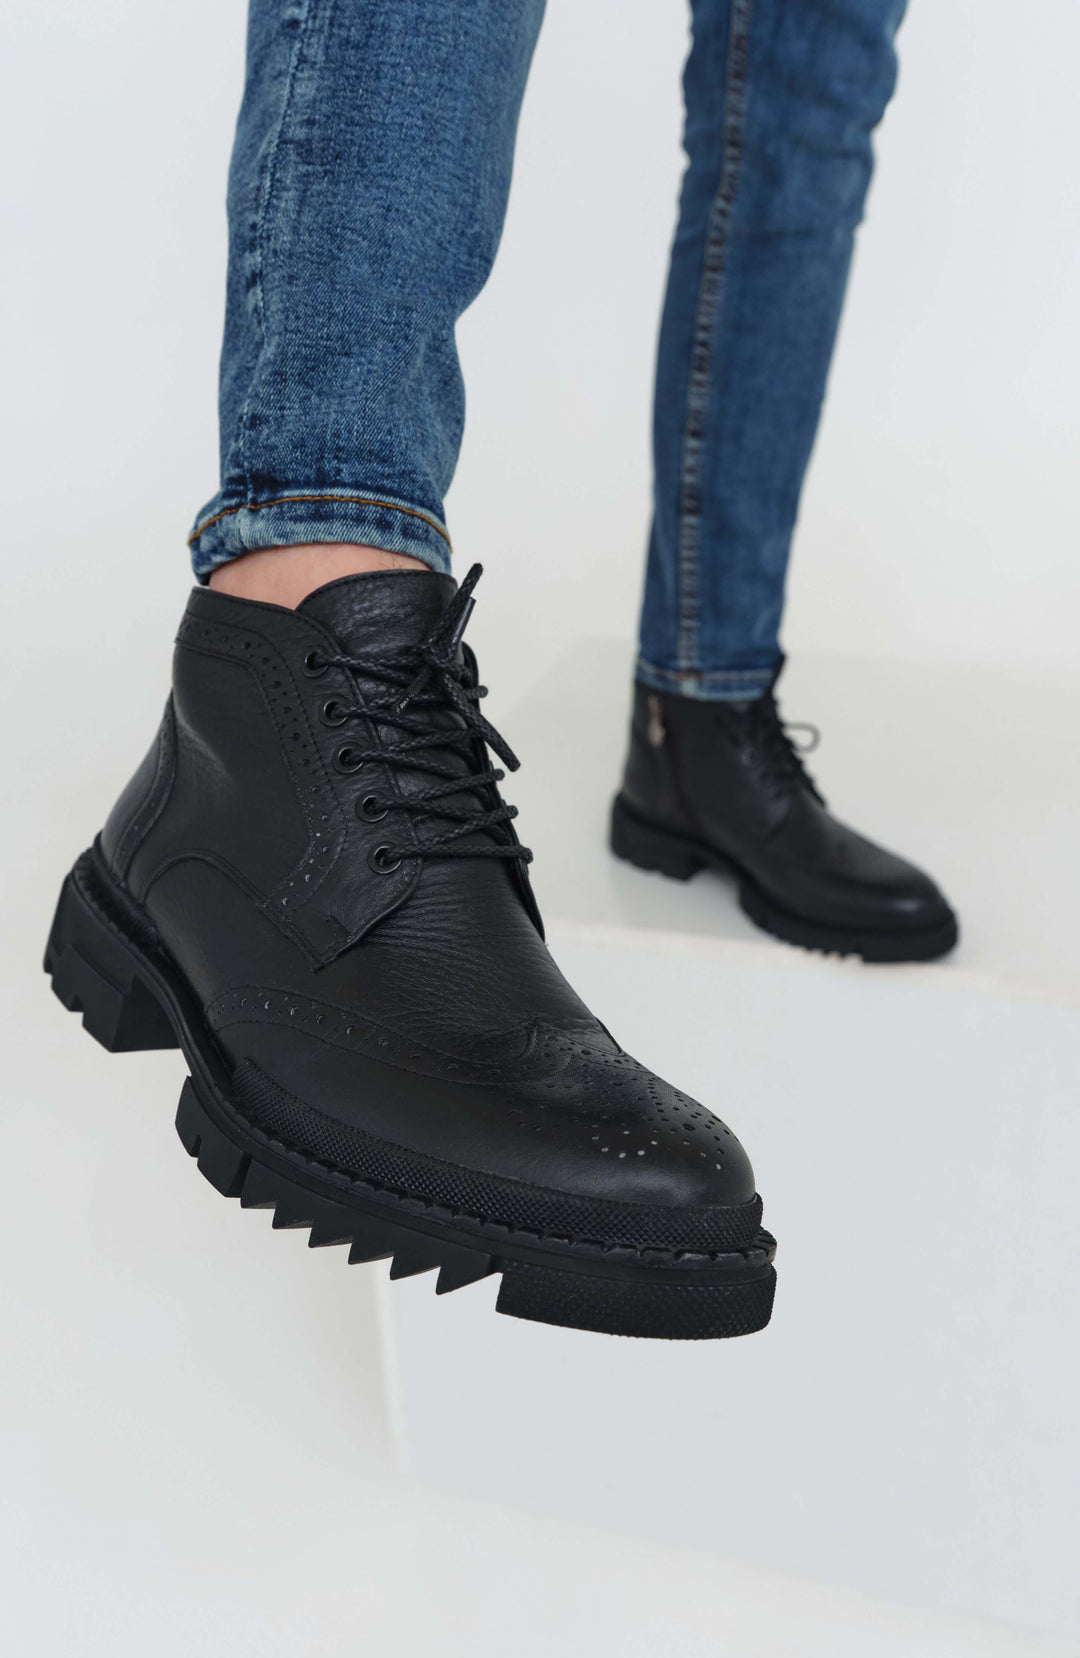 Men's Black Winter Boots made from Genuine Leather Estro ER00108458.